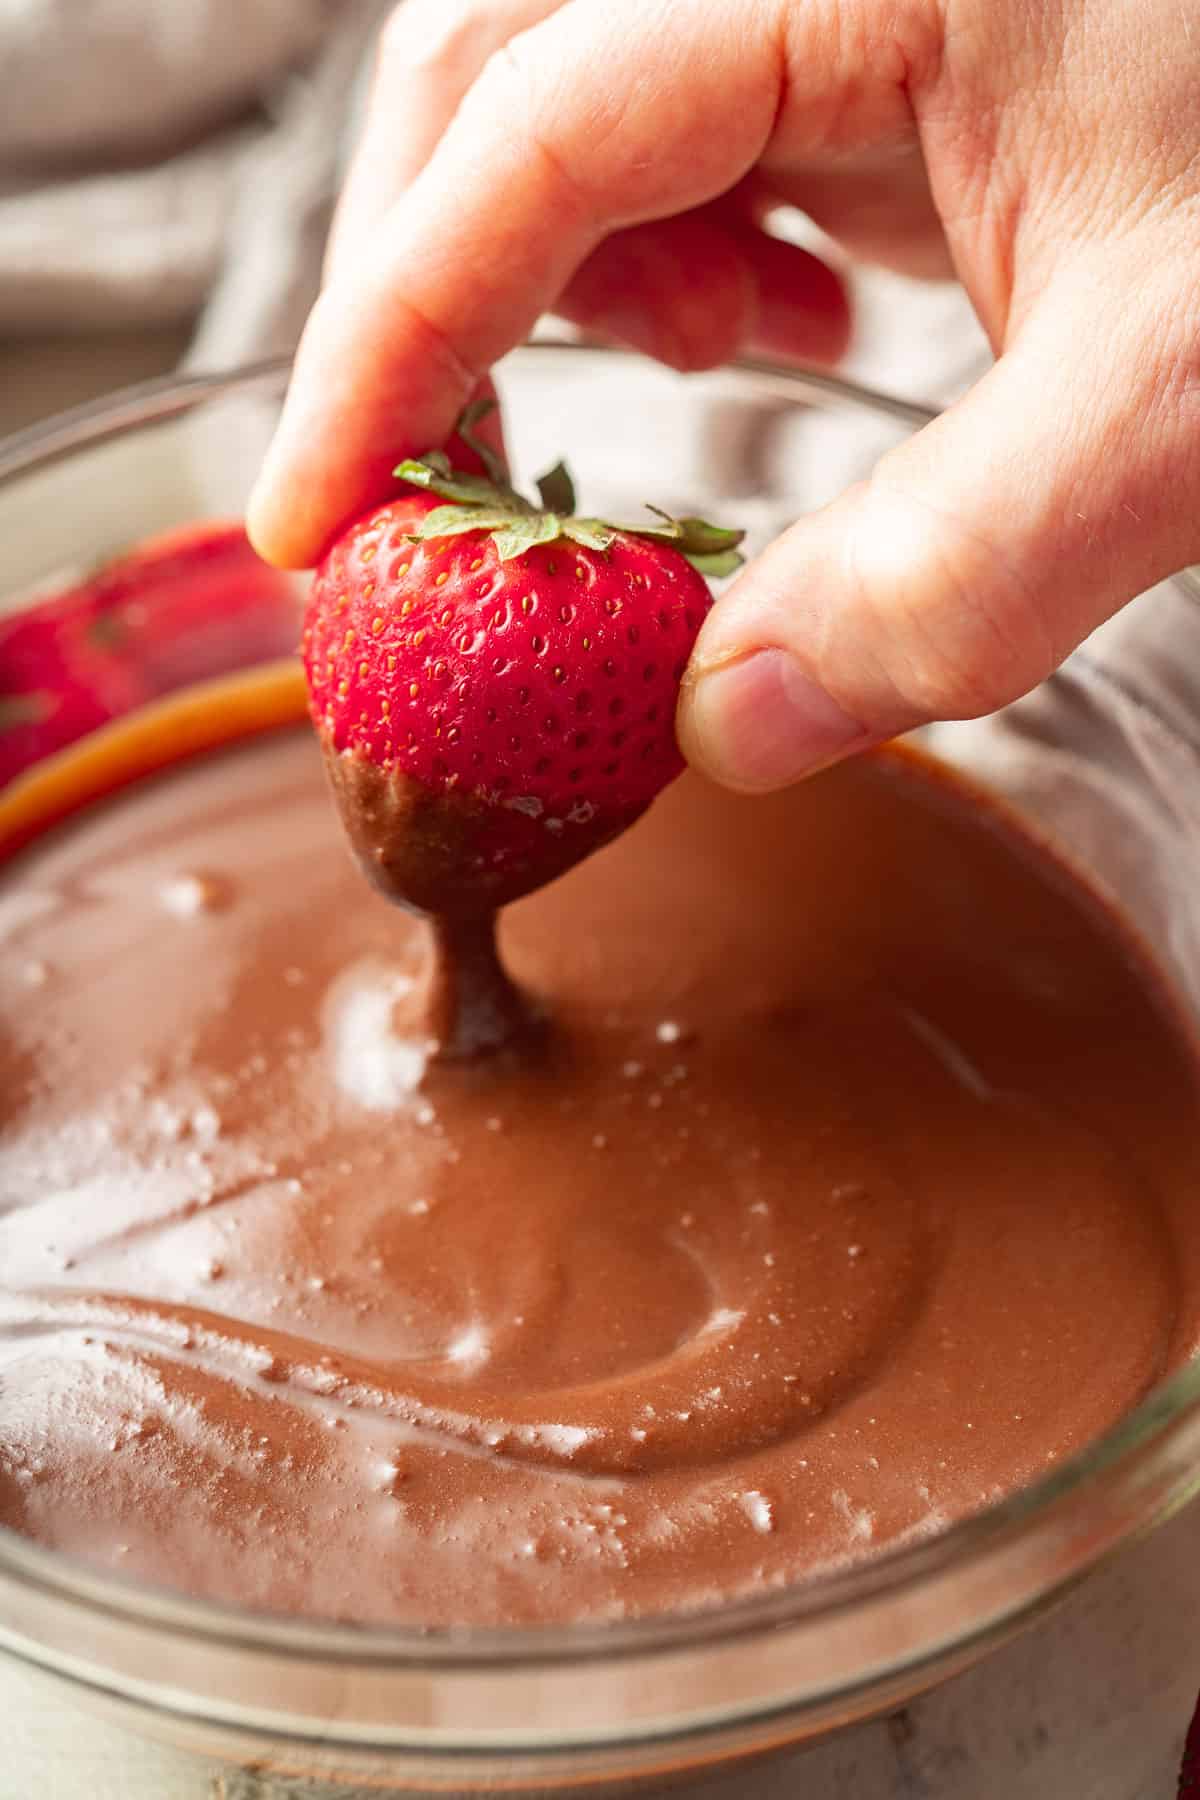 Hand dipping a strawberry into a bowl of Vegan Ganache.